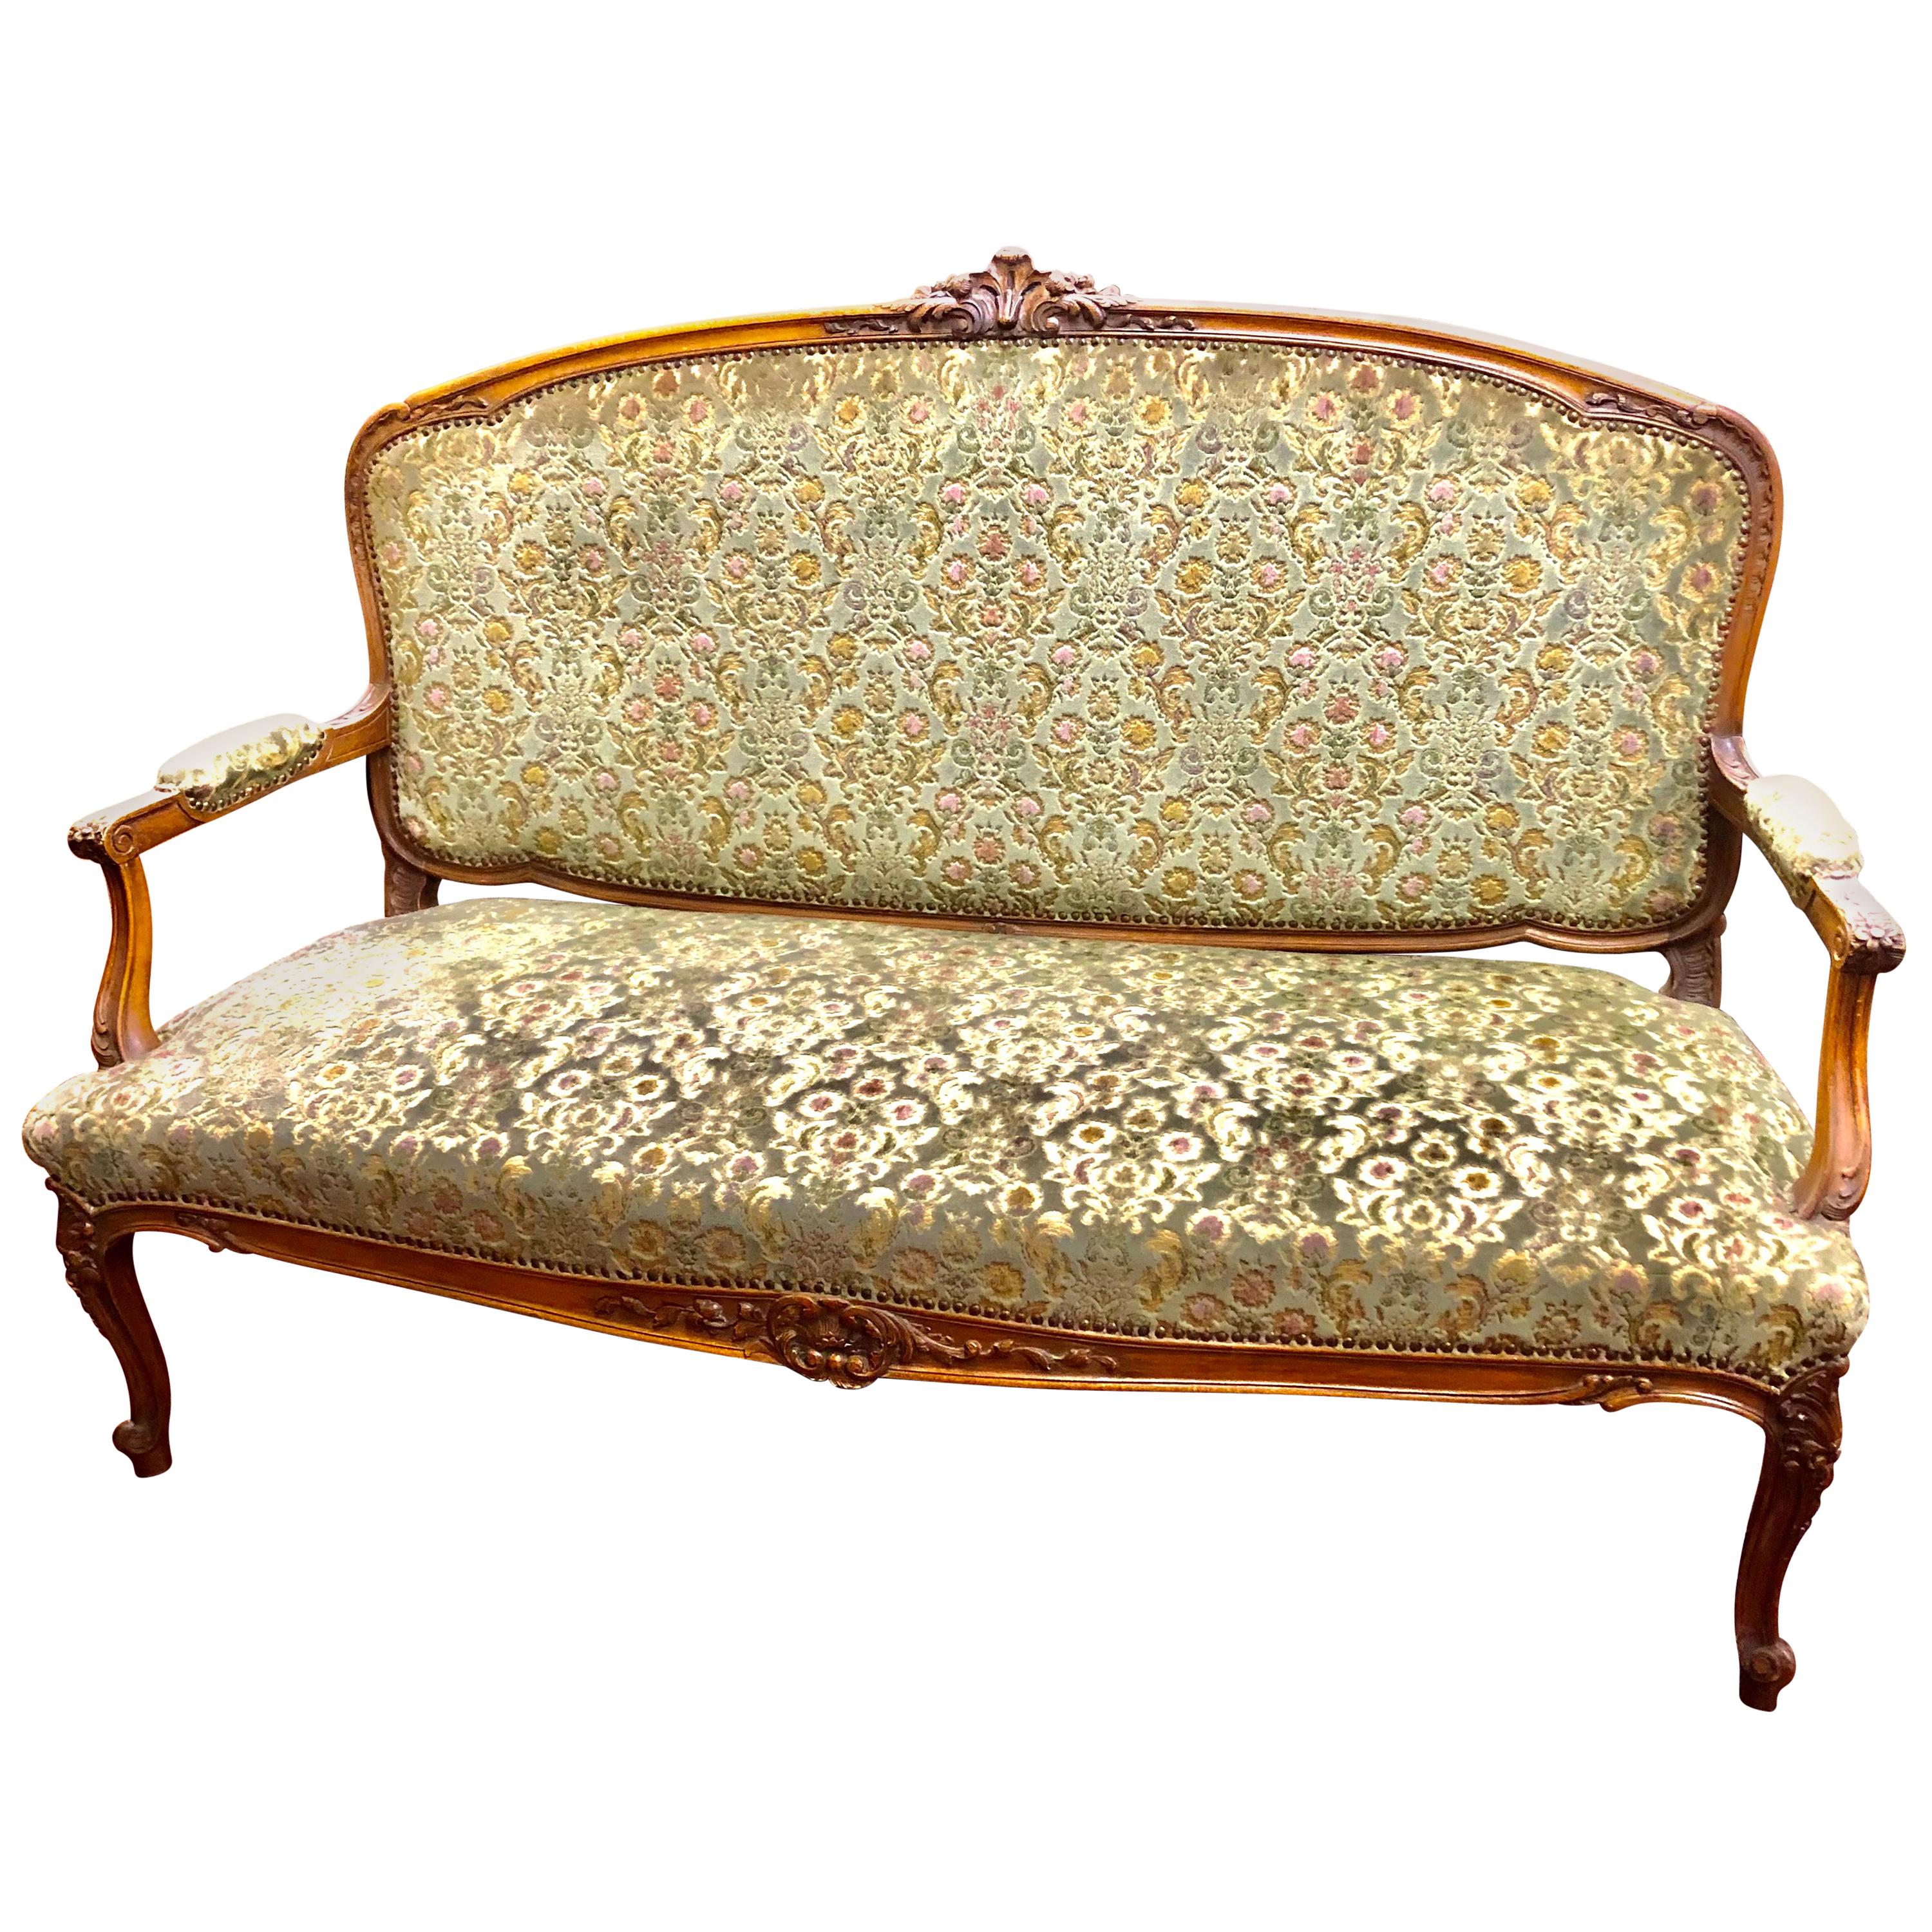 Antique French Hand Carved Fruitwood Louis XV Style Sofa or Loveseat, Cut Velvet